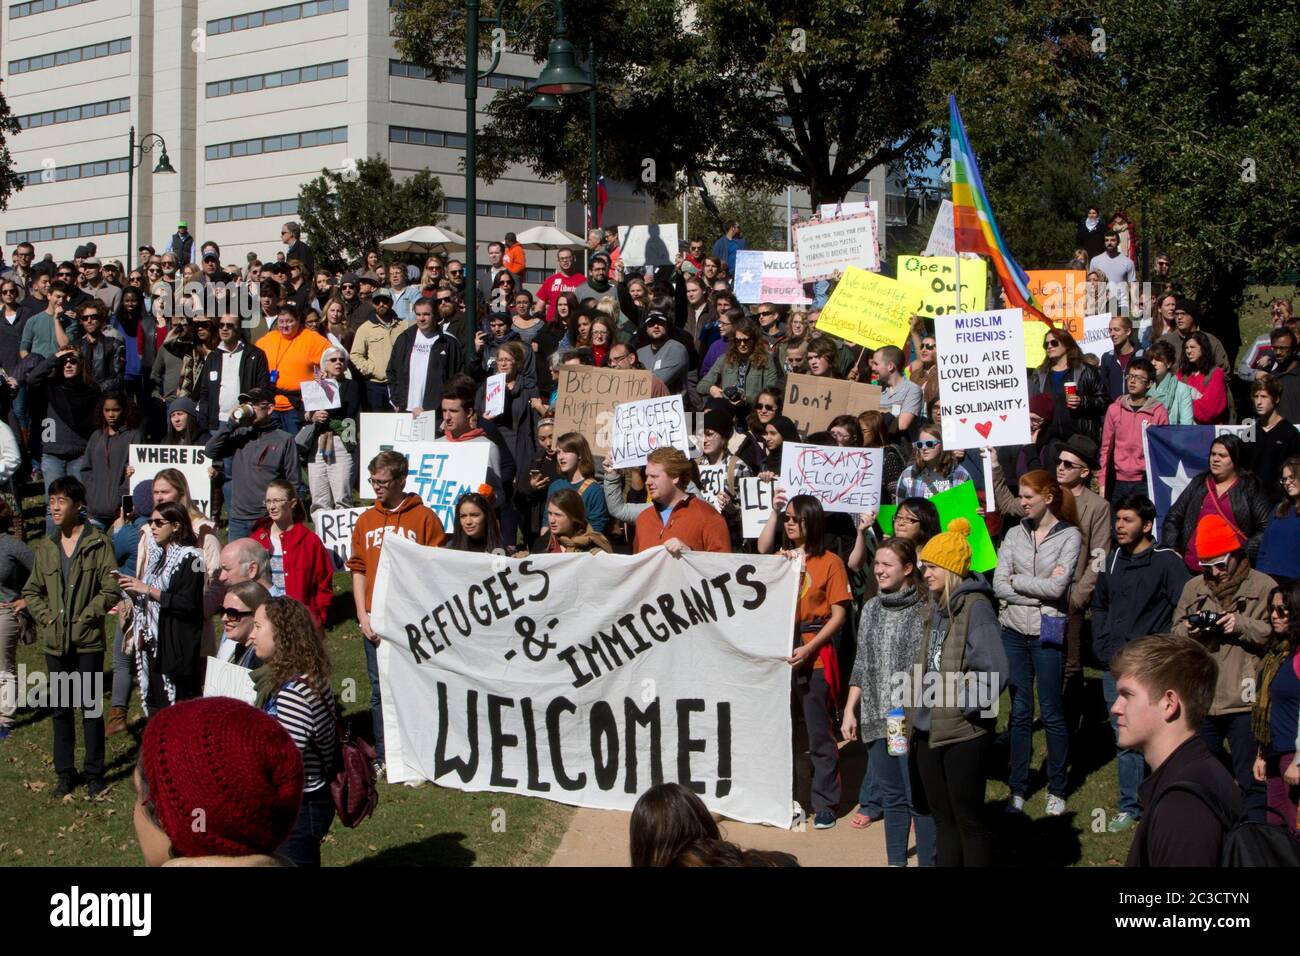 Austin, Texas USA, Nov. 22, 2015: Group gathers at Wooldridge Park in downtown Austin to protest Gov. Greg Abbott's decision to ban Syrian refugees from entering the state. The Syrian People Solidarity Group organized the protest, which attracted several hundred demonstrators.©MKC/Bob Daemmrich Photography, Inc. Stock Photo